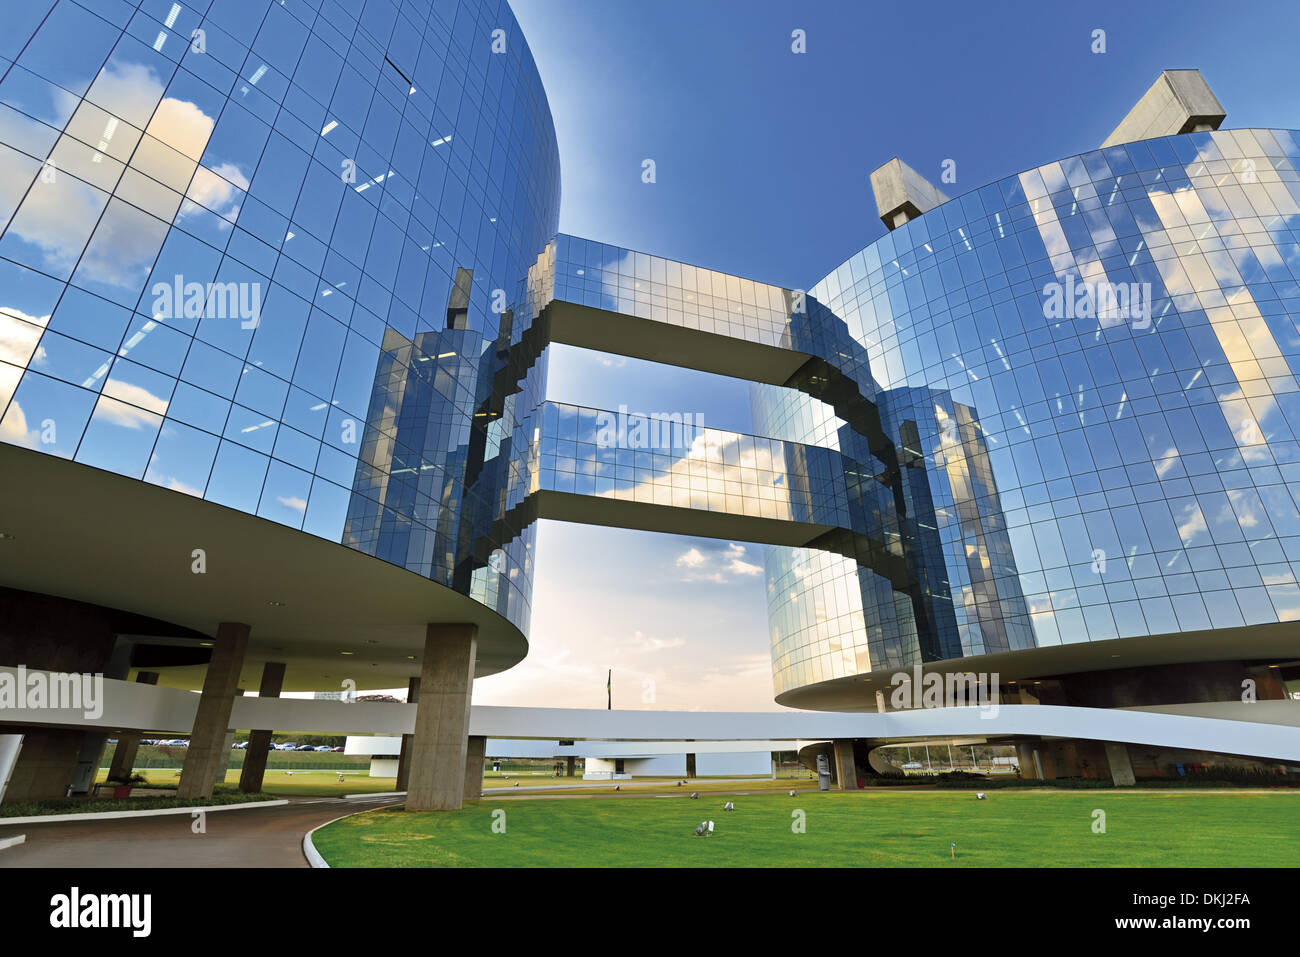 Brazil, Brasilia, General Prosecution Department of the Federal Republic of Brazil, building, architecture, Oscar Niemeyer, travel, tourism, sightseeing, construction, state building, brazilian capital, capital of Brazil, glass, towers, outside view, World Stock Photo